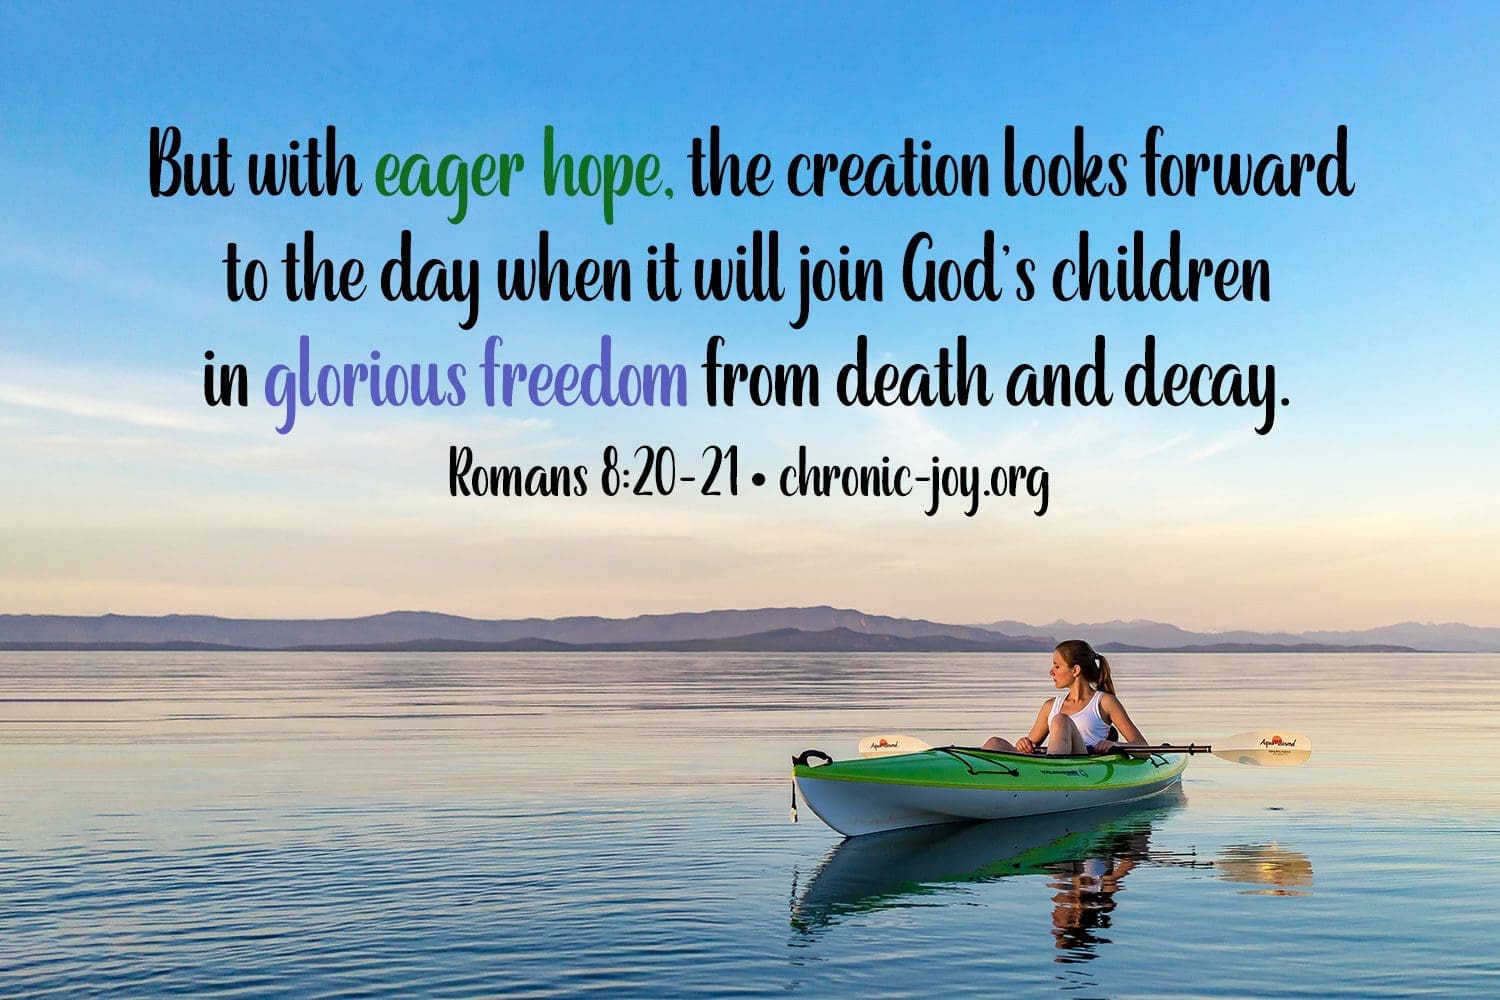 "But with eager hope, the creation looks forward to the day when it will join God’s children in glorious freedom from death and decay." Romans 8:20-21